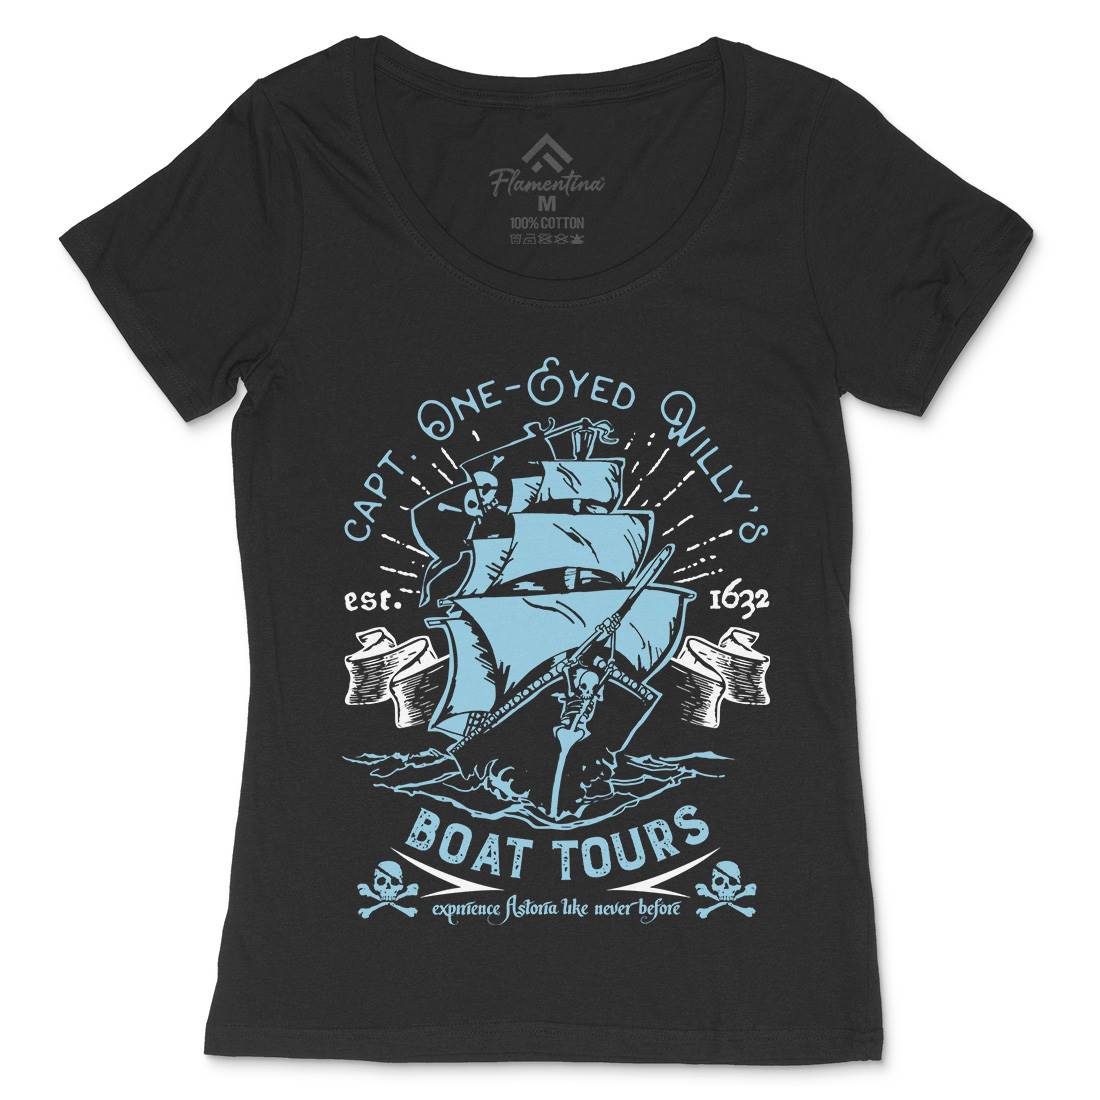 One-Eyed Willys Boat Tours Womens Scoop Neck T-Shirt Horror D160